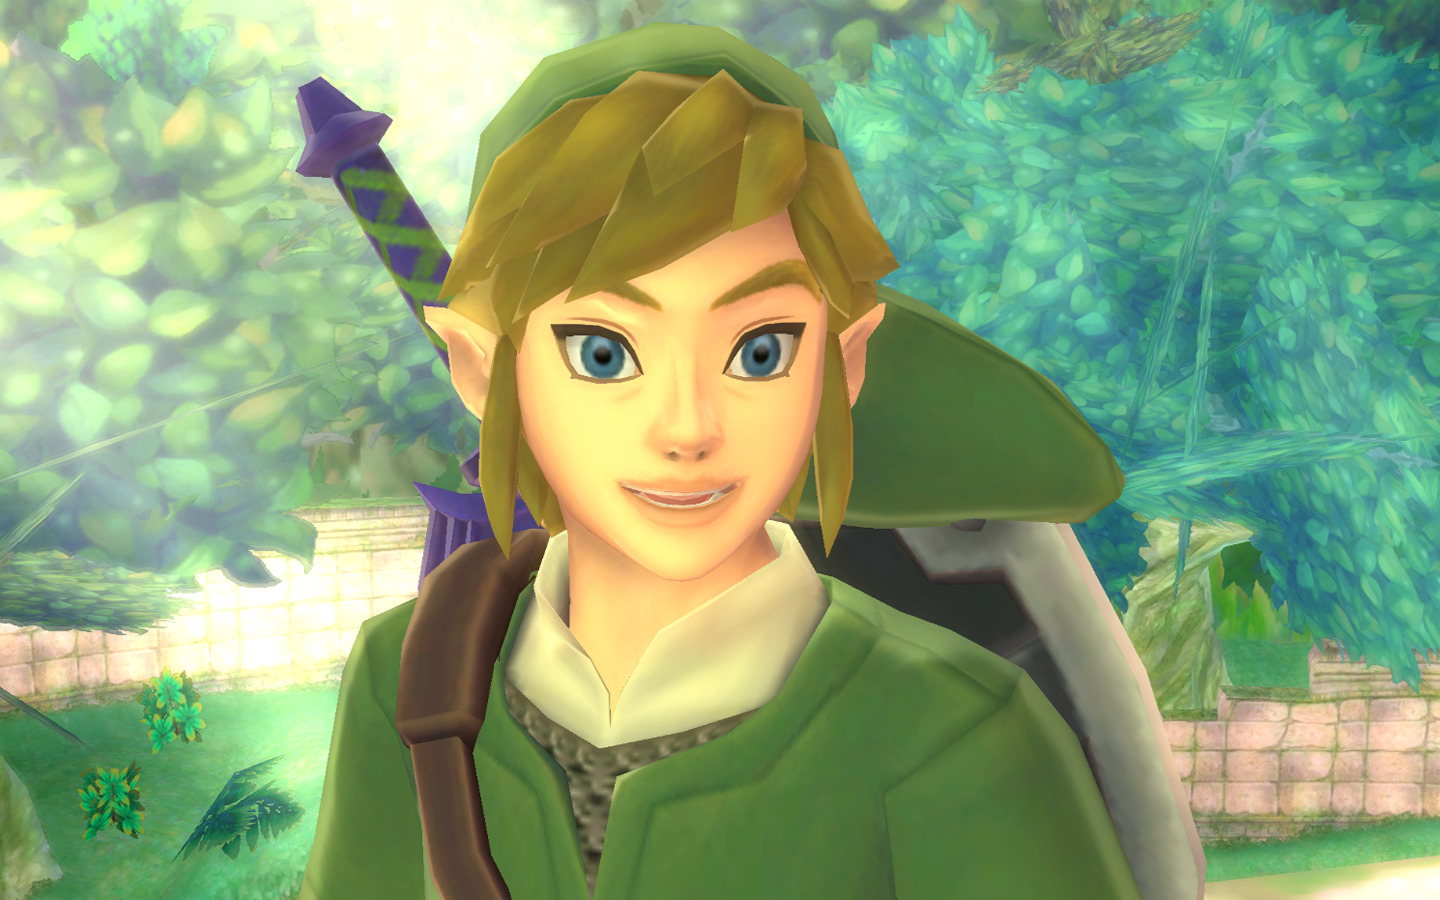 7. "Link with Blue Hair" by Skyward Sword - wide 10